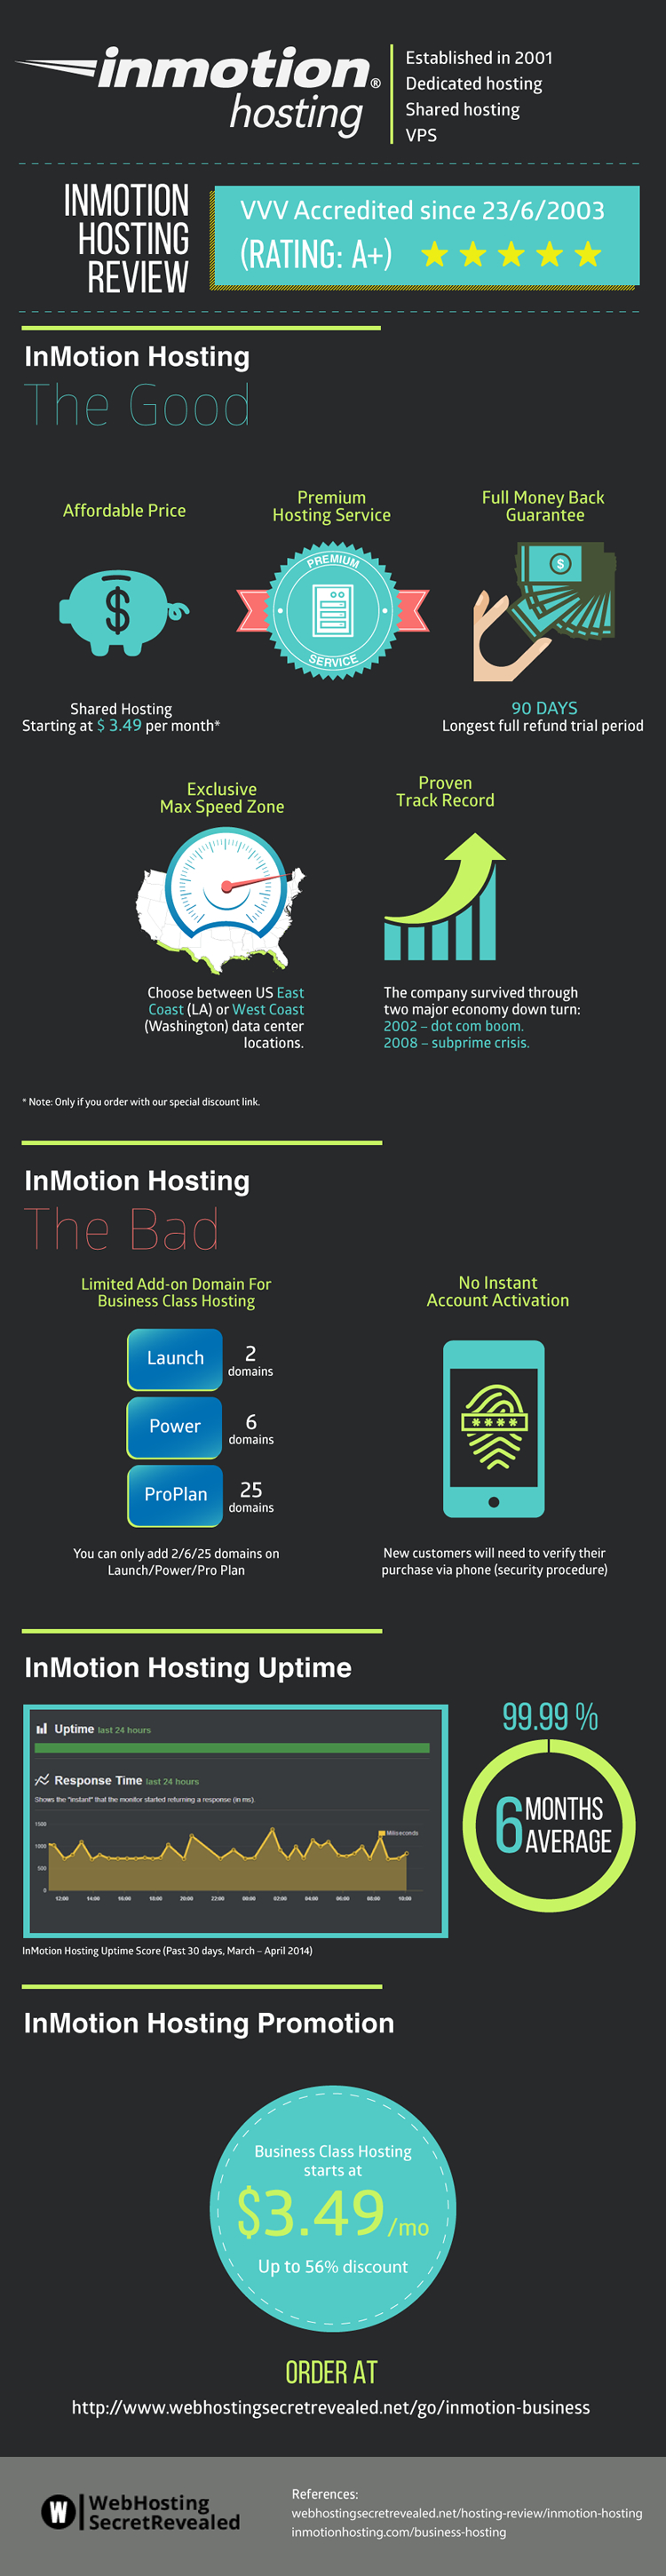 All You Need to Know About InMotion Hosting